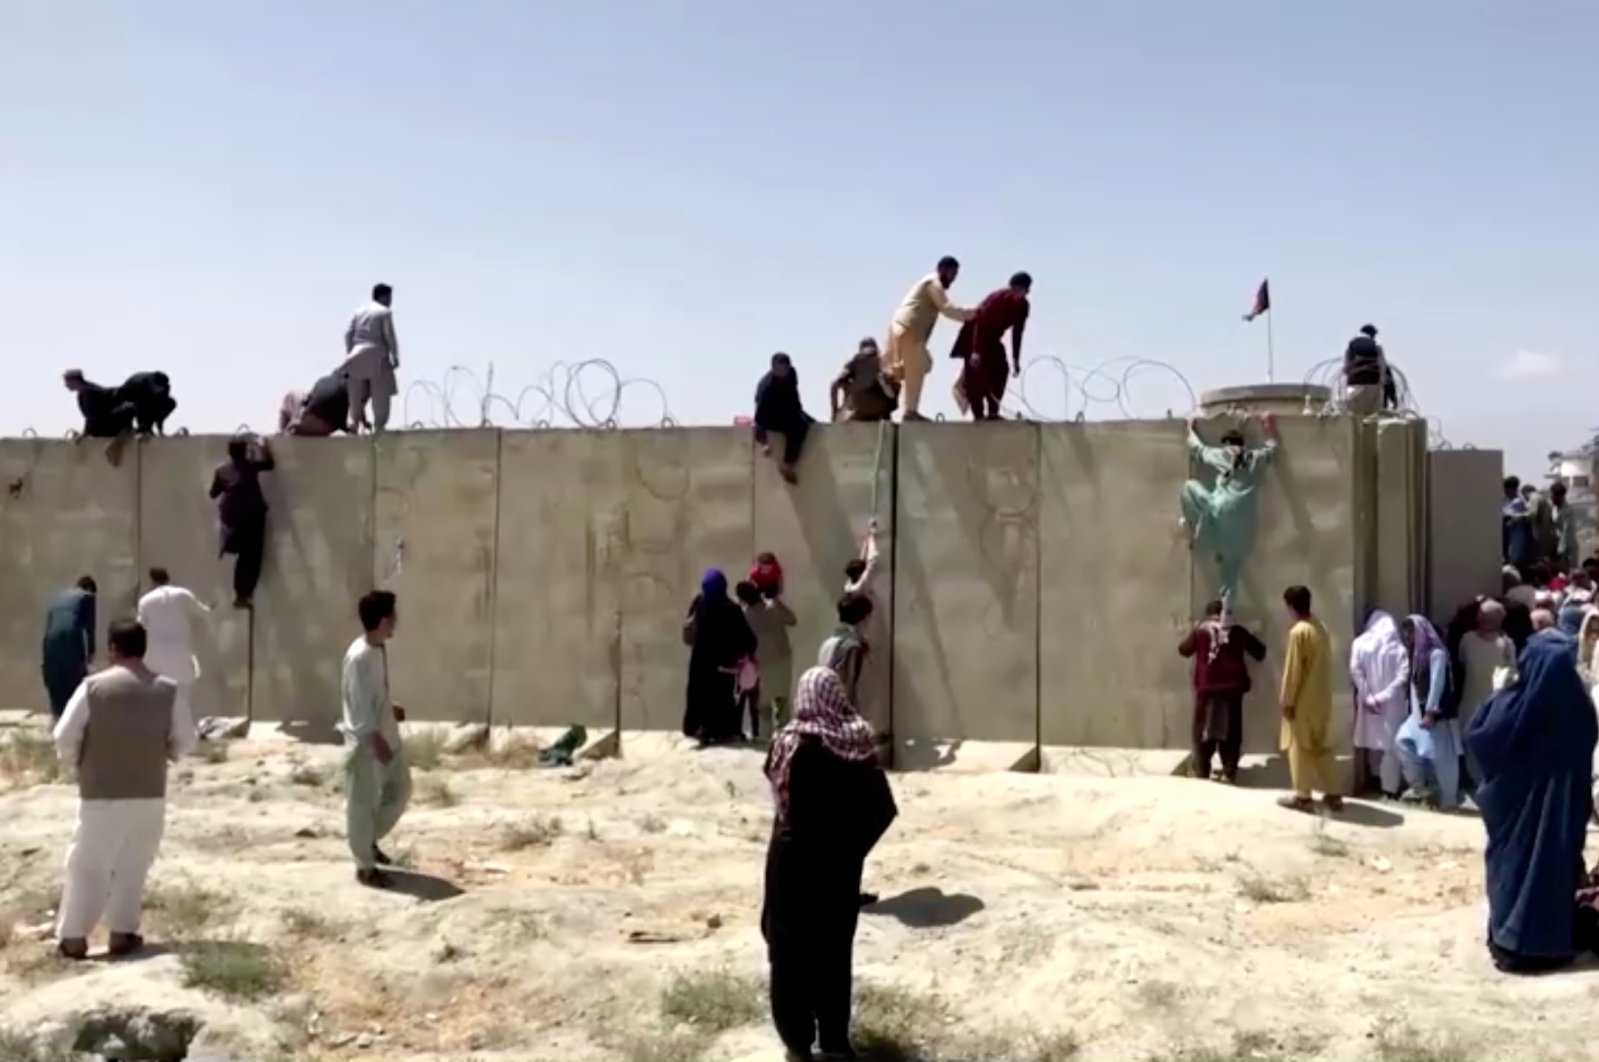 People climb a barbed wire wall to enter the Kabul Hamid Karzai International Airport, Kabul, Afghanistan, Aug. 16, 2021. (REUTERS Photo)